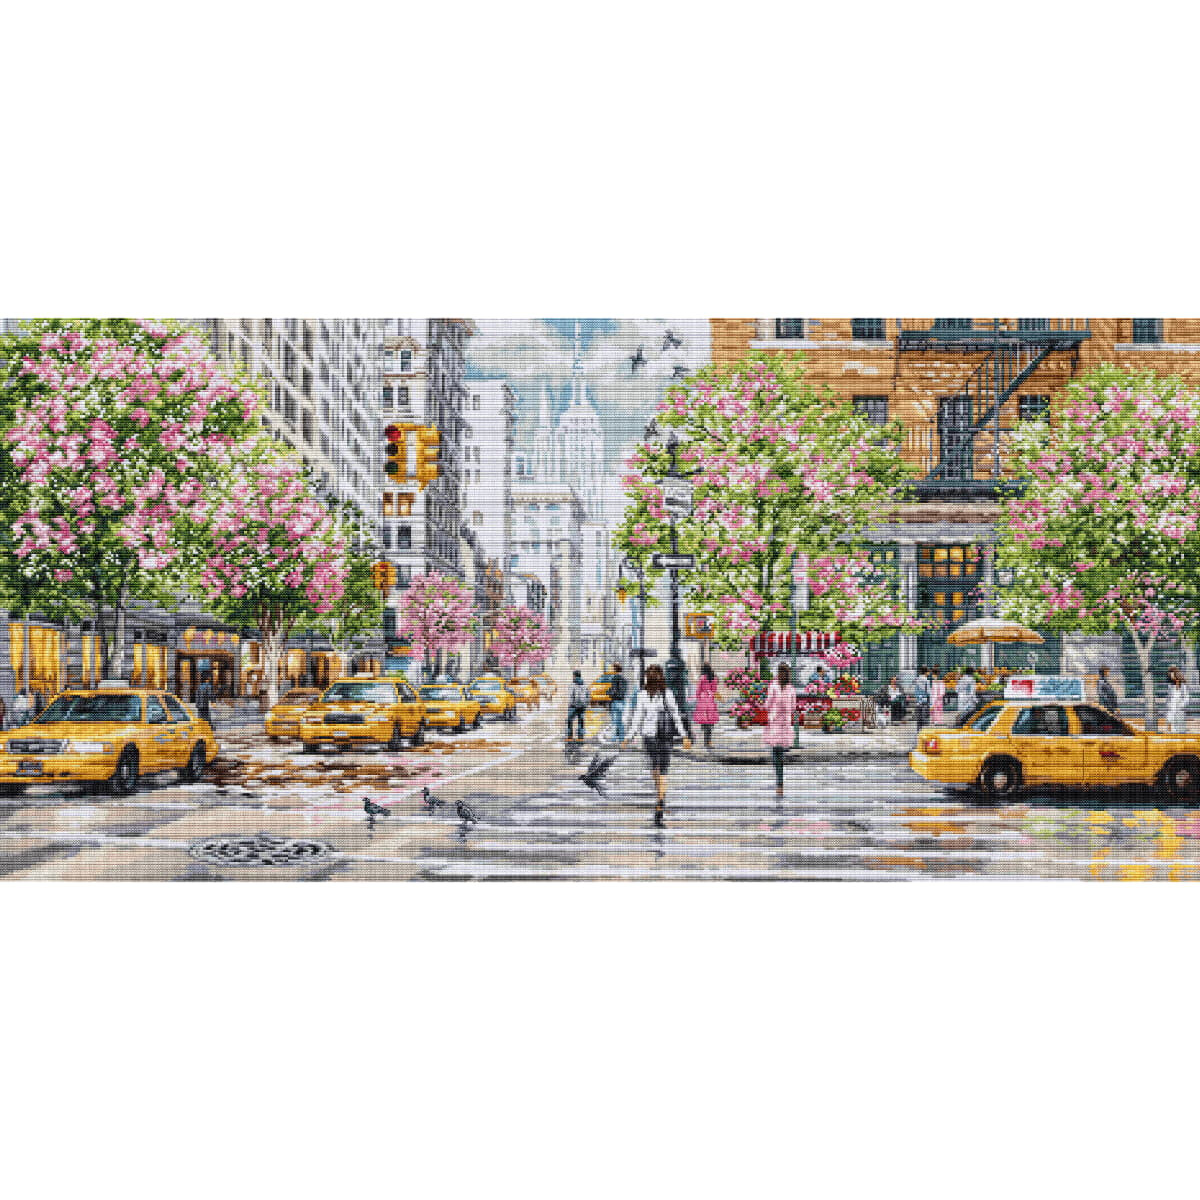 Painting of a busy city street with yellow cabs and...